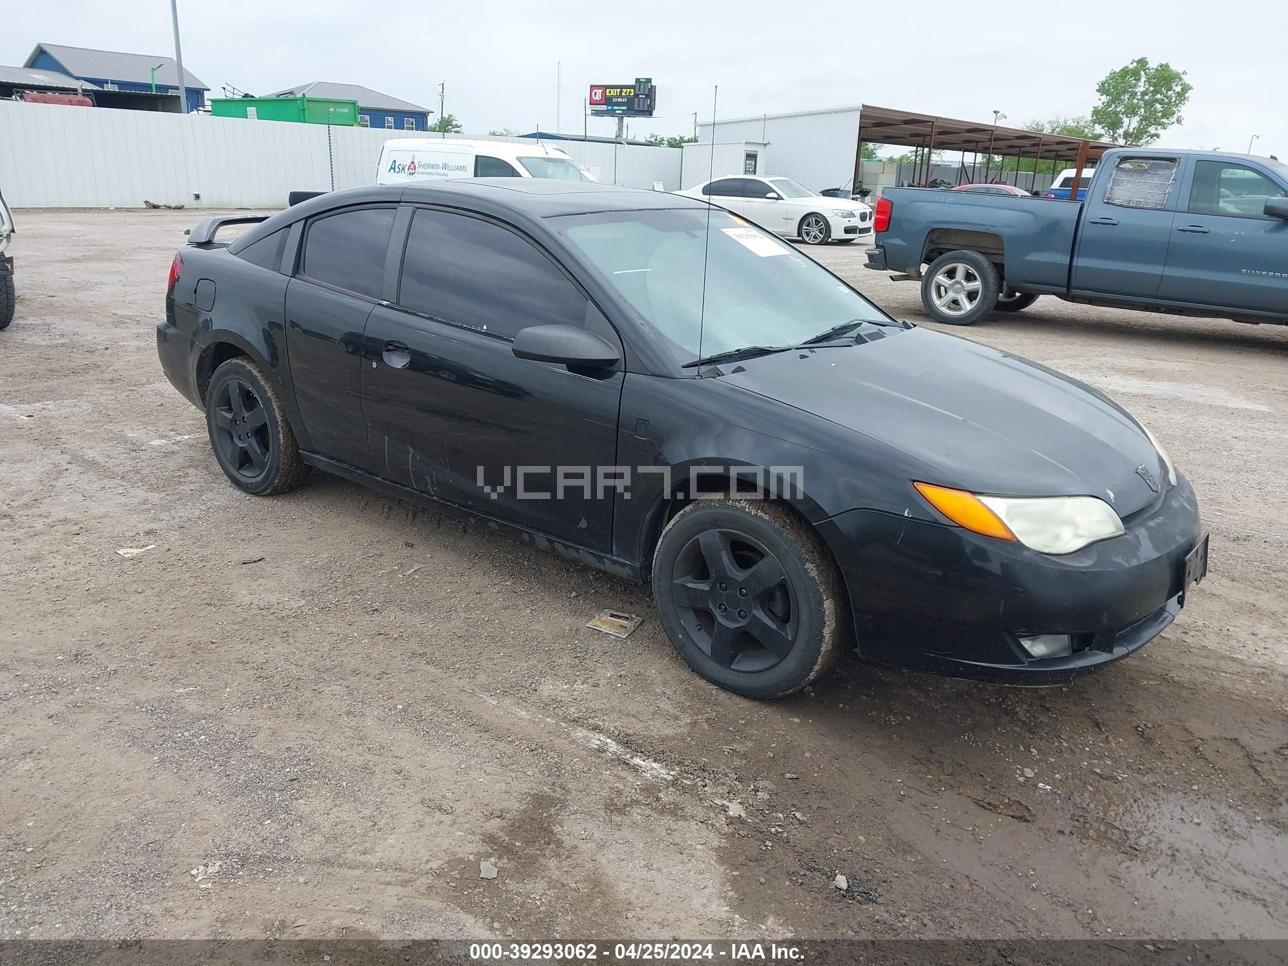 VIN: 1G8AW15F57Z157352 - saturn ion